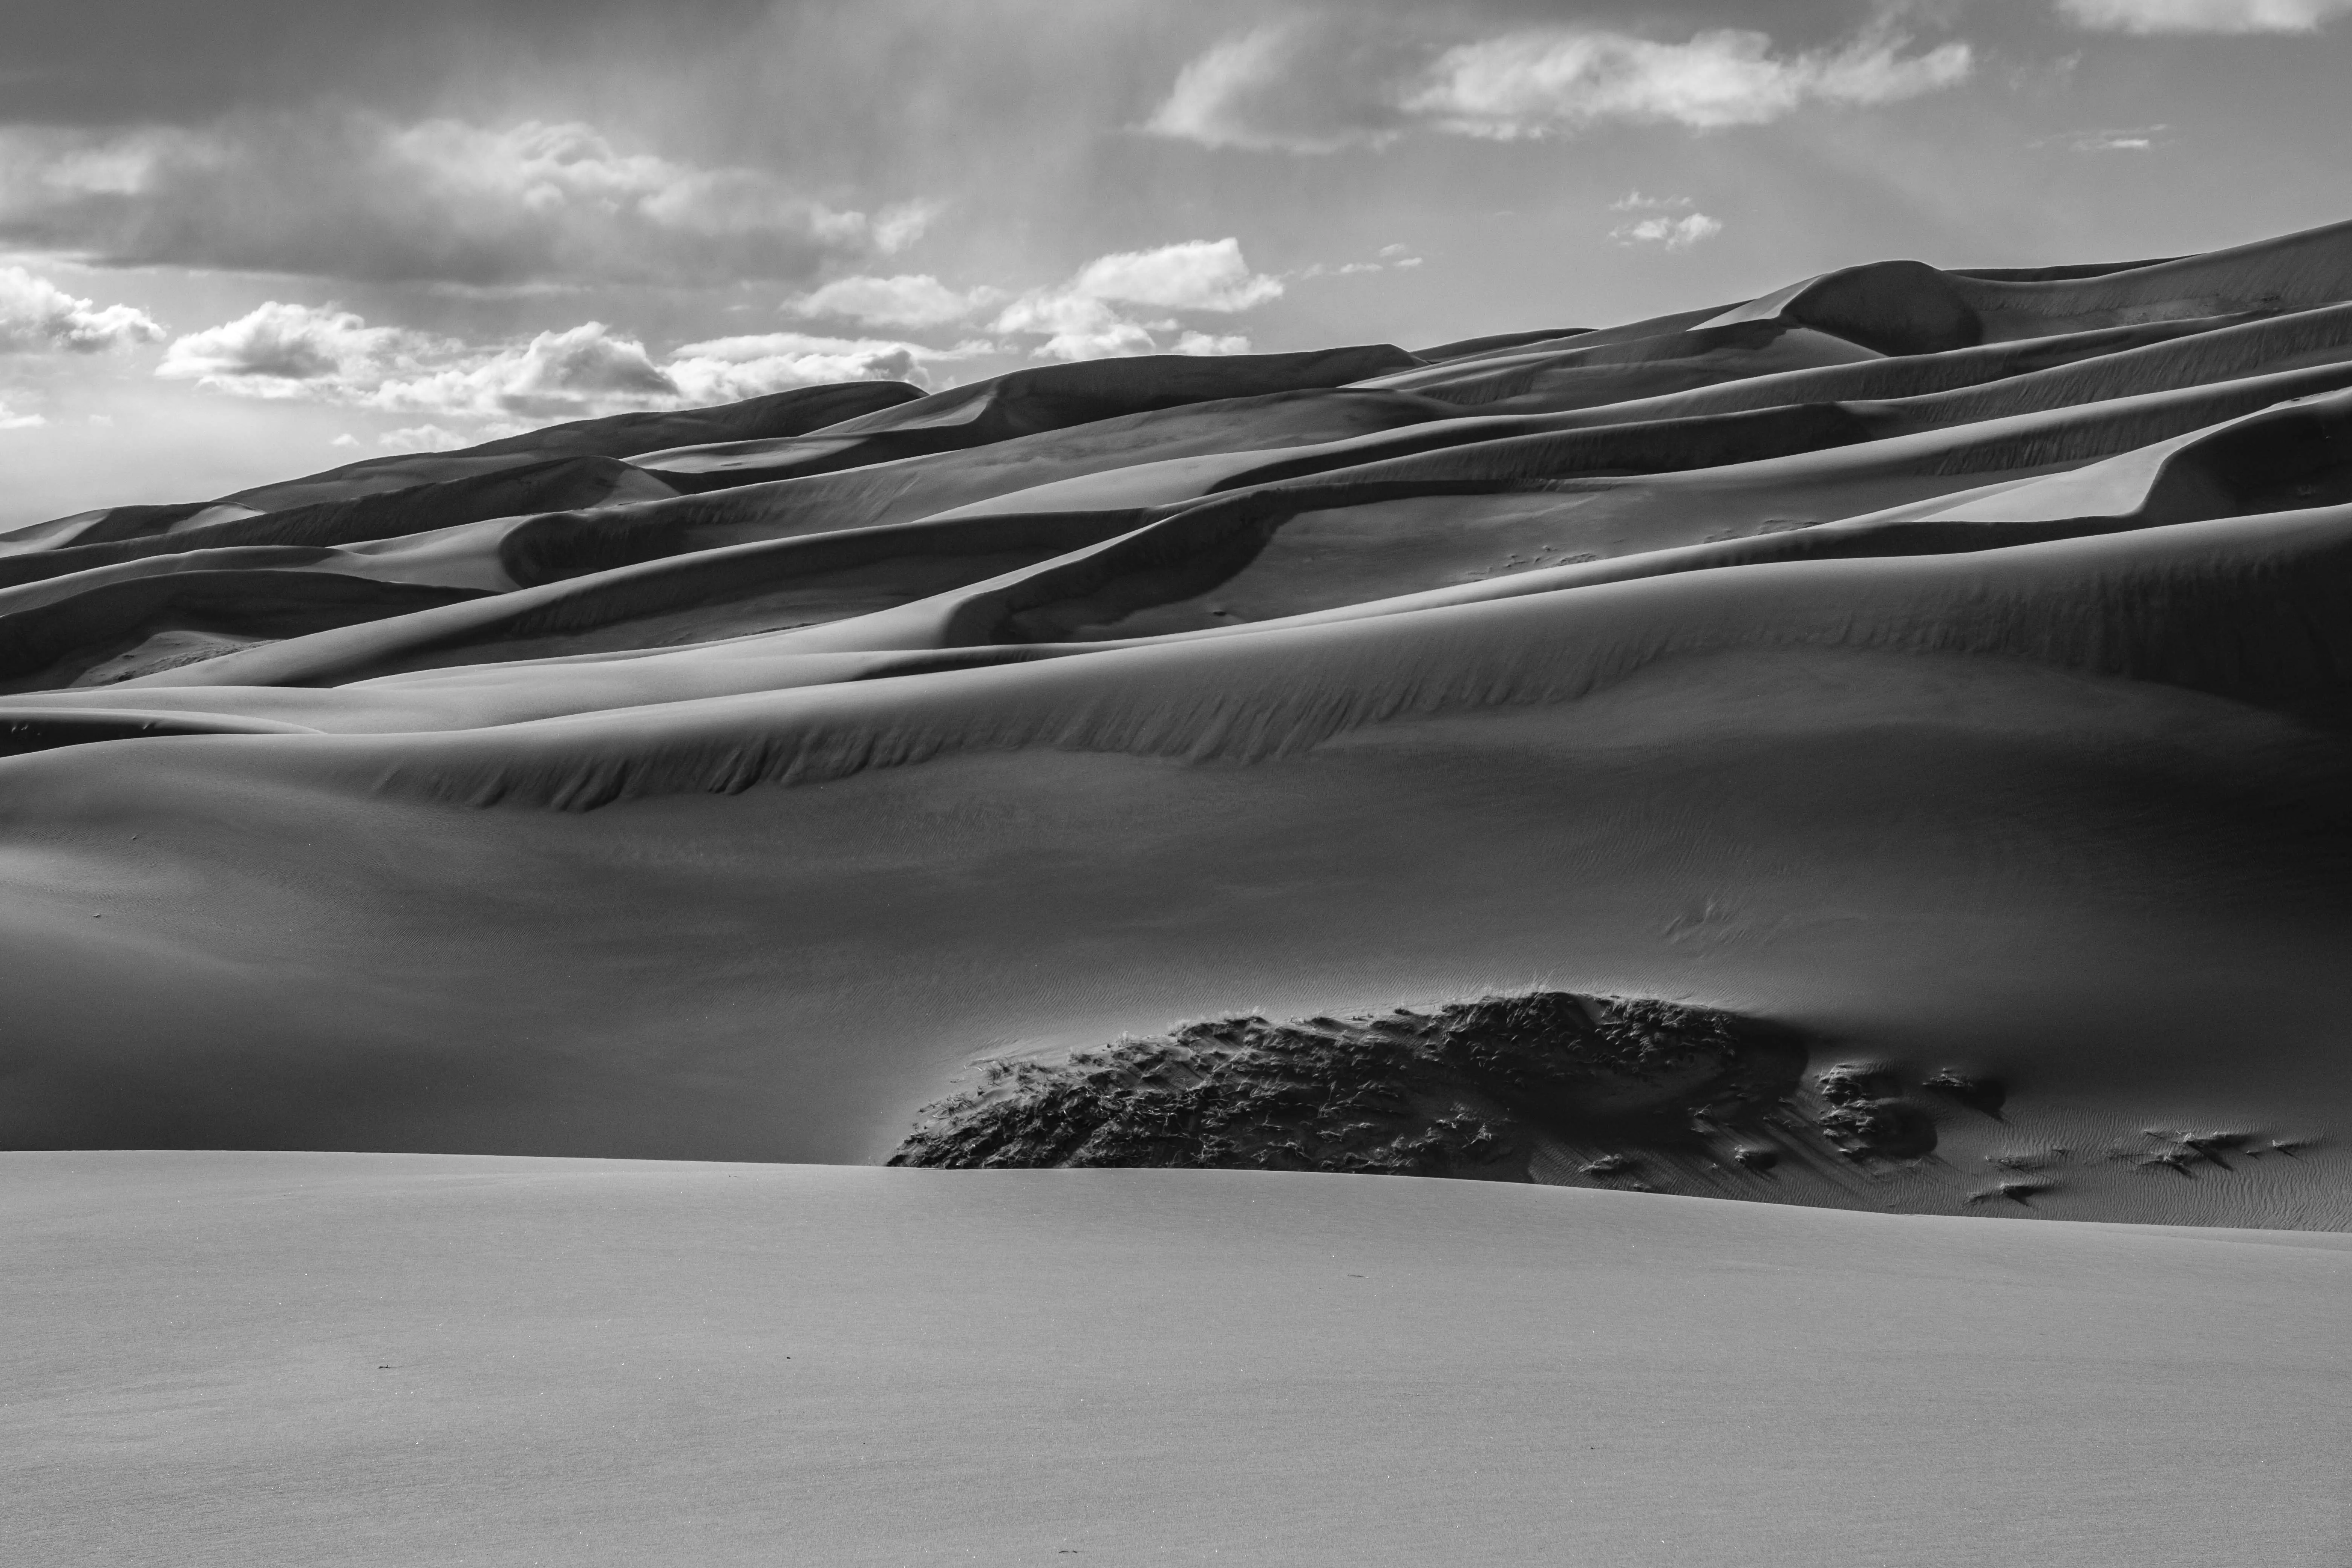 Dune hills with a cloudy sky.